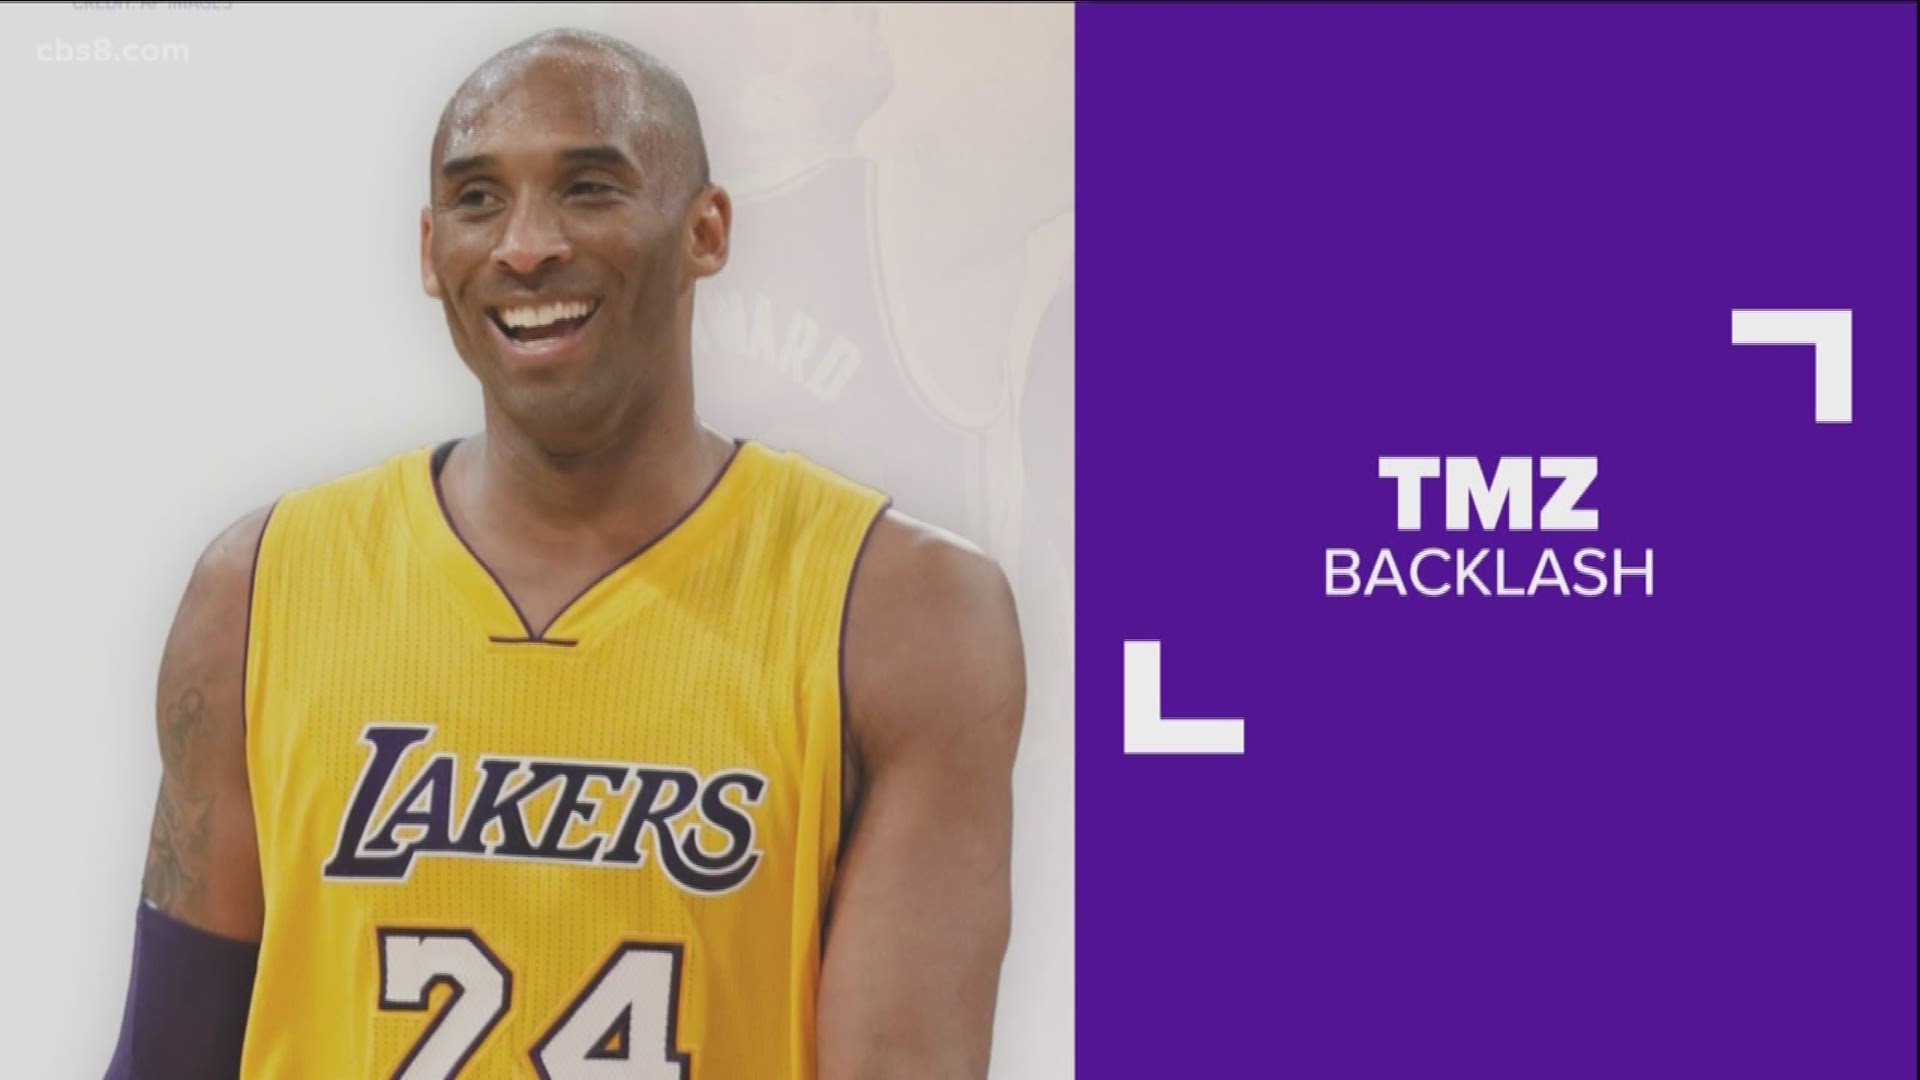 There's backlash against the show TMZ following the death of NBA star, Kobe Bryant and eight others.